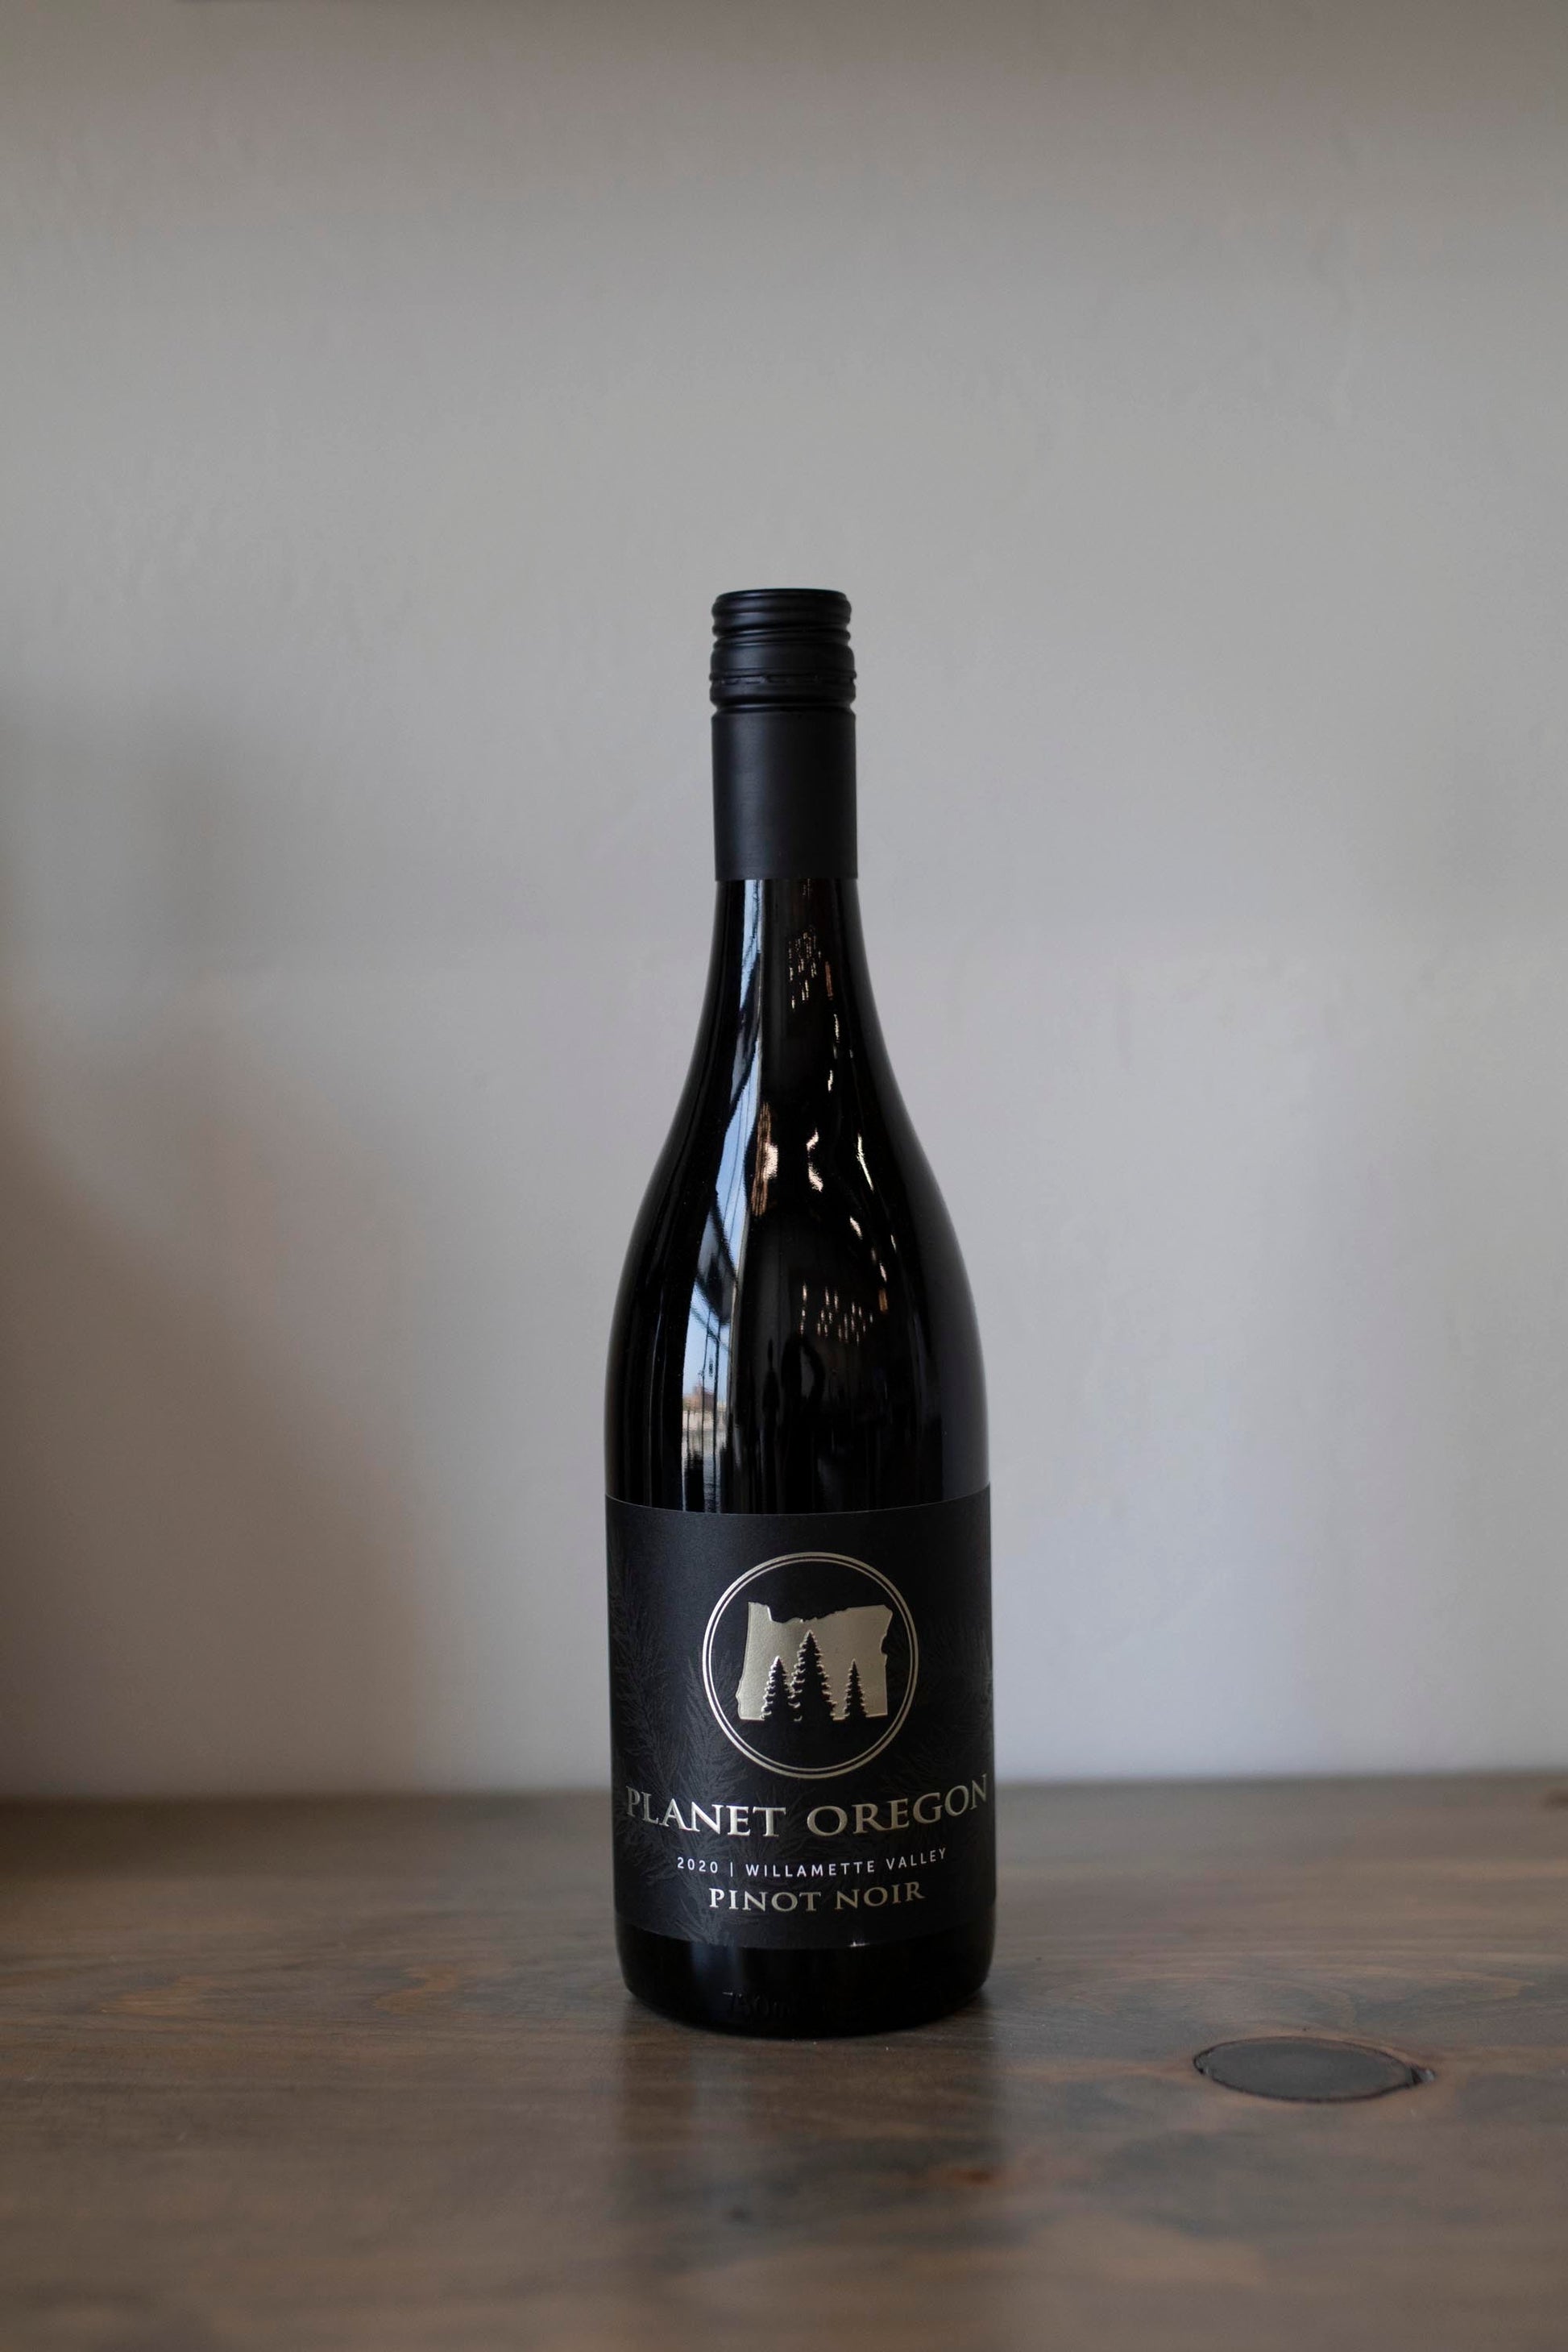 Bottle of Planet Oregon Pinot Noir found at Vine & Board in 3809 NW 166th St Suite 1, Edmond, OK 73012